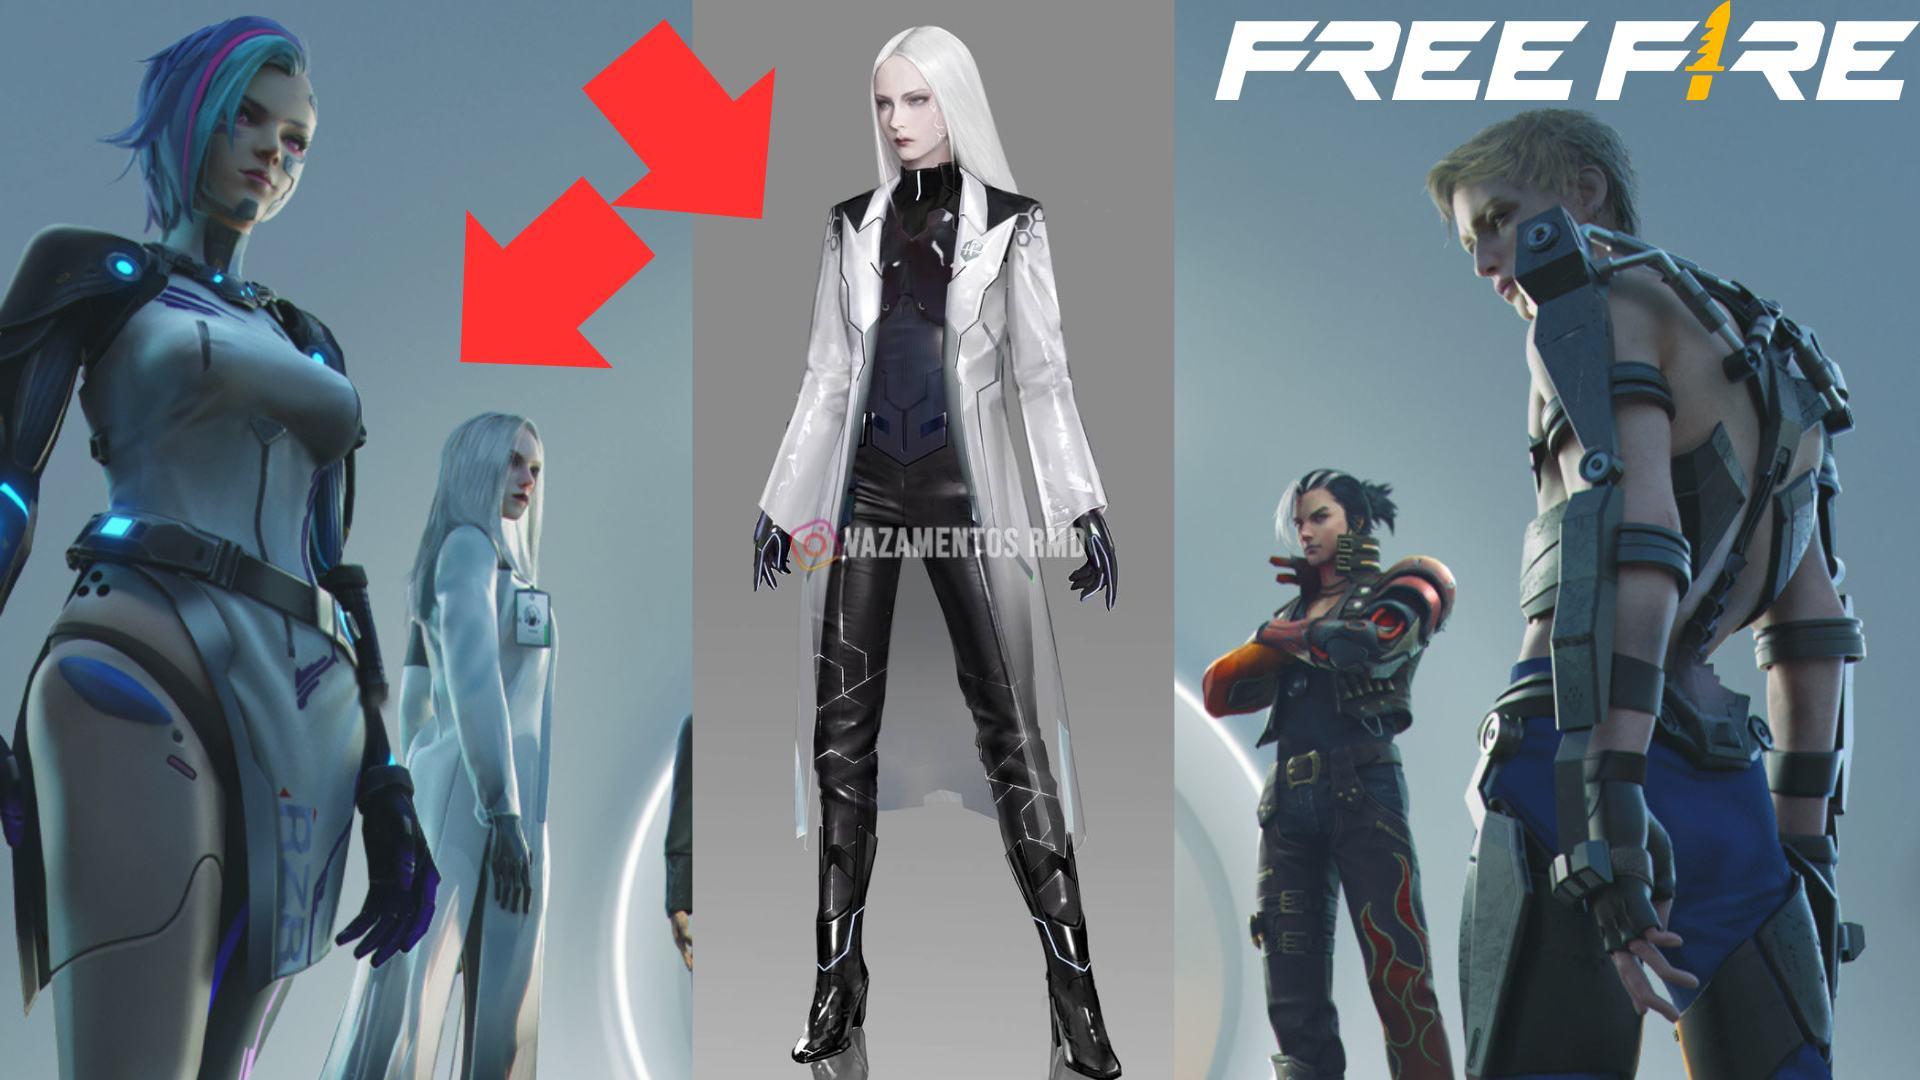 Free Fire Max Characters 2023: Ignis, Sonia, Orion, Santino, and